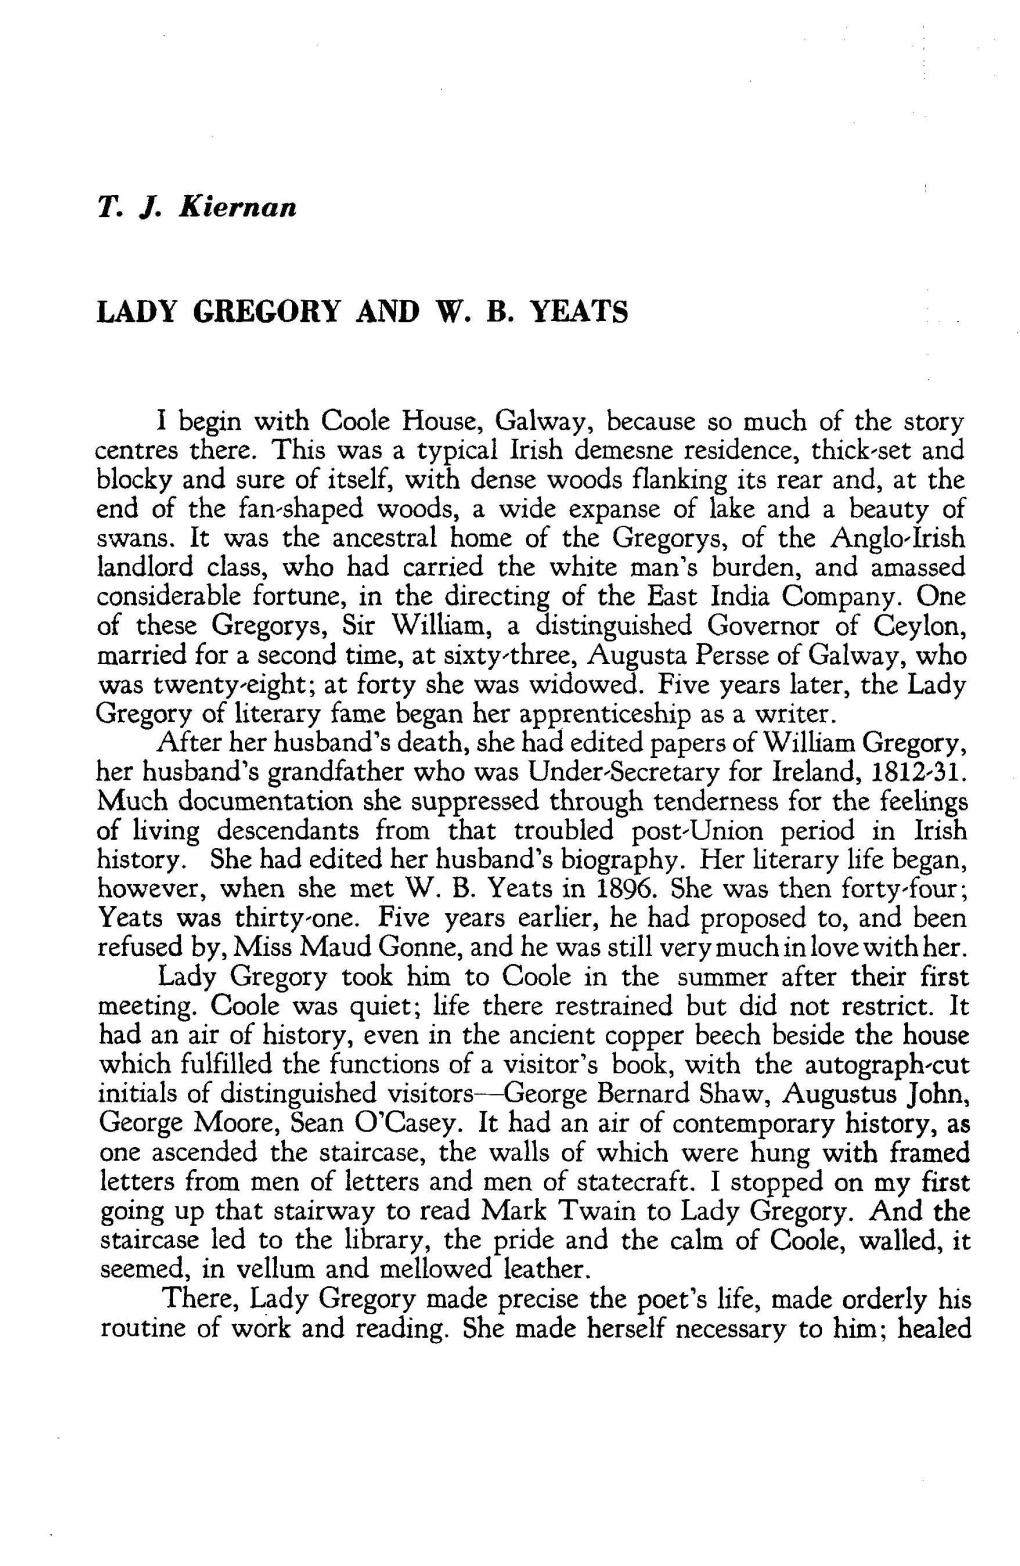 Lady Gregory and W. B. Yeats